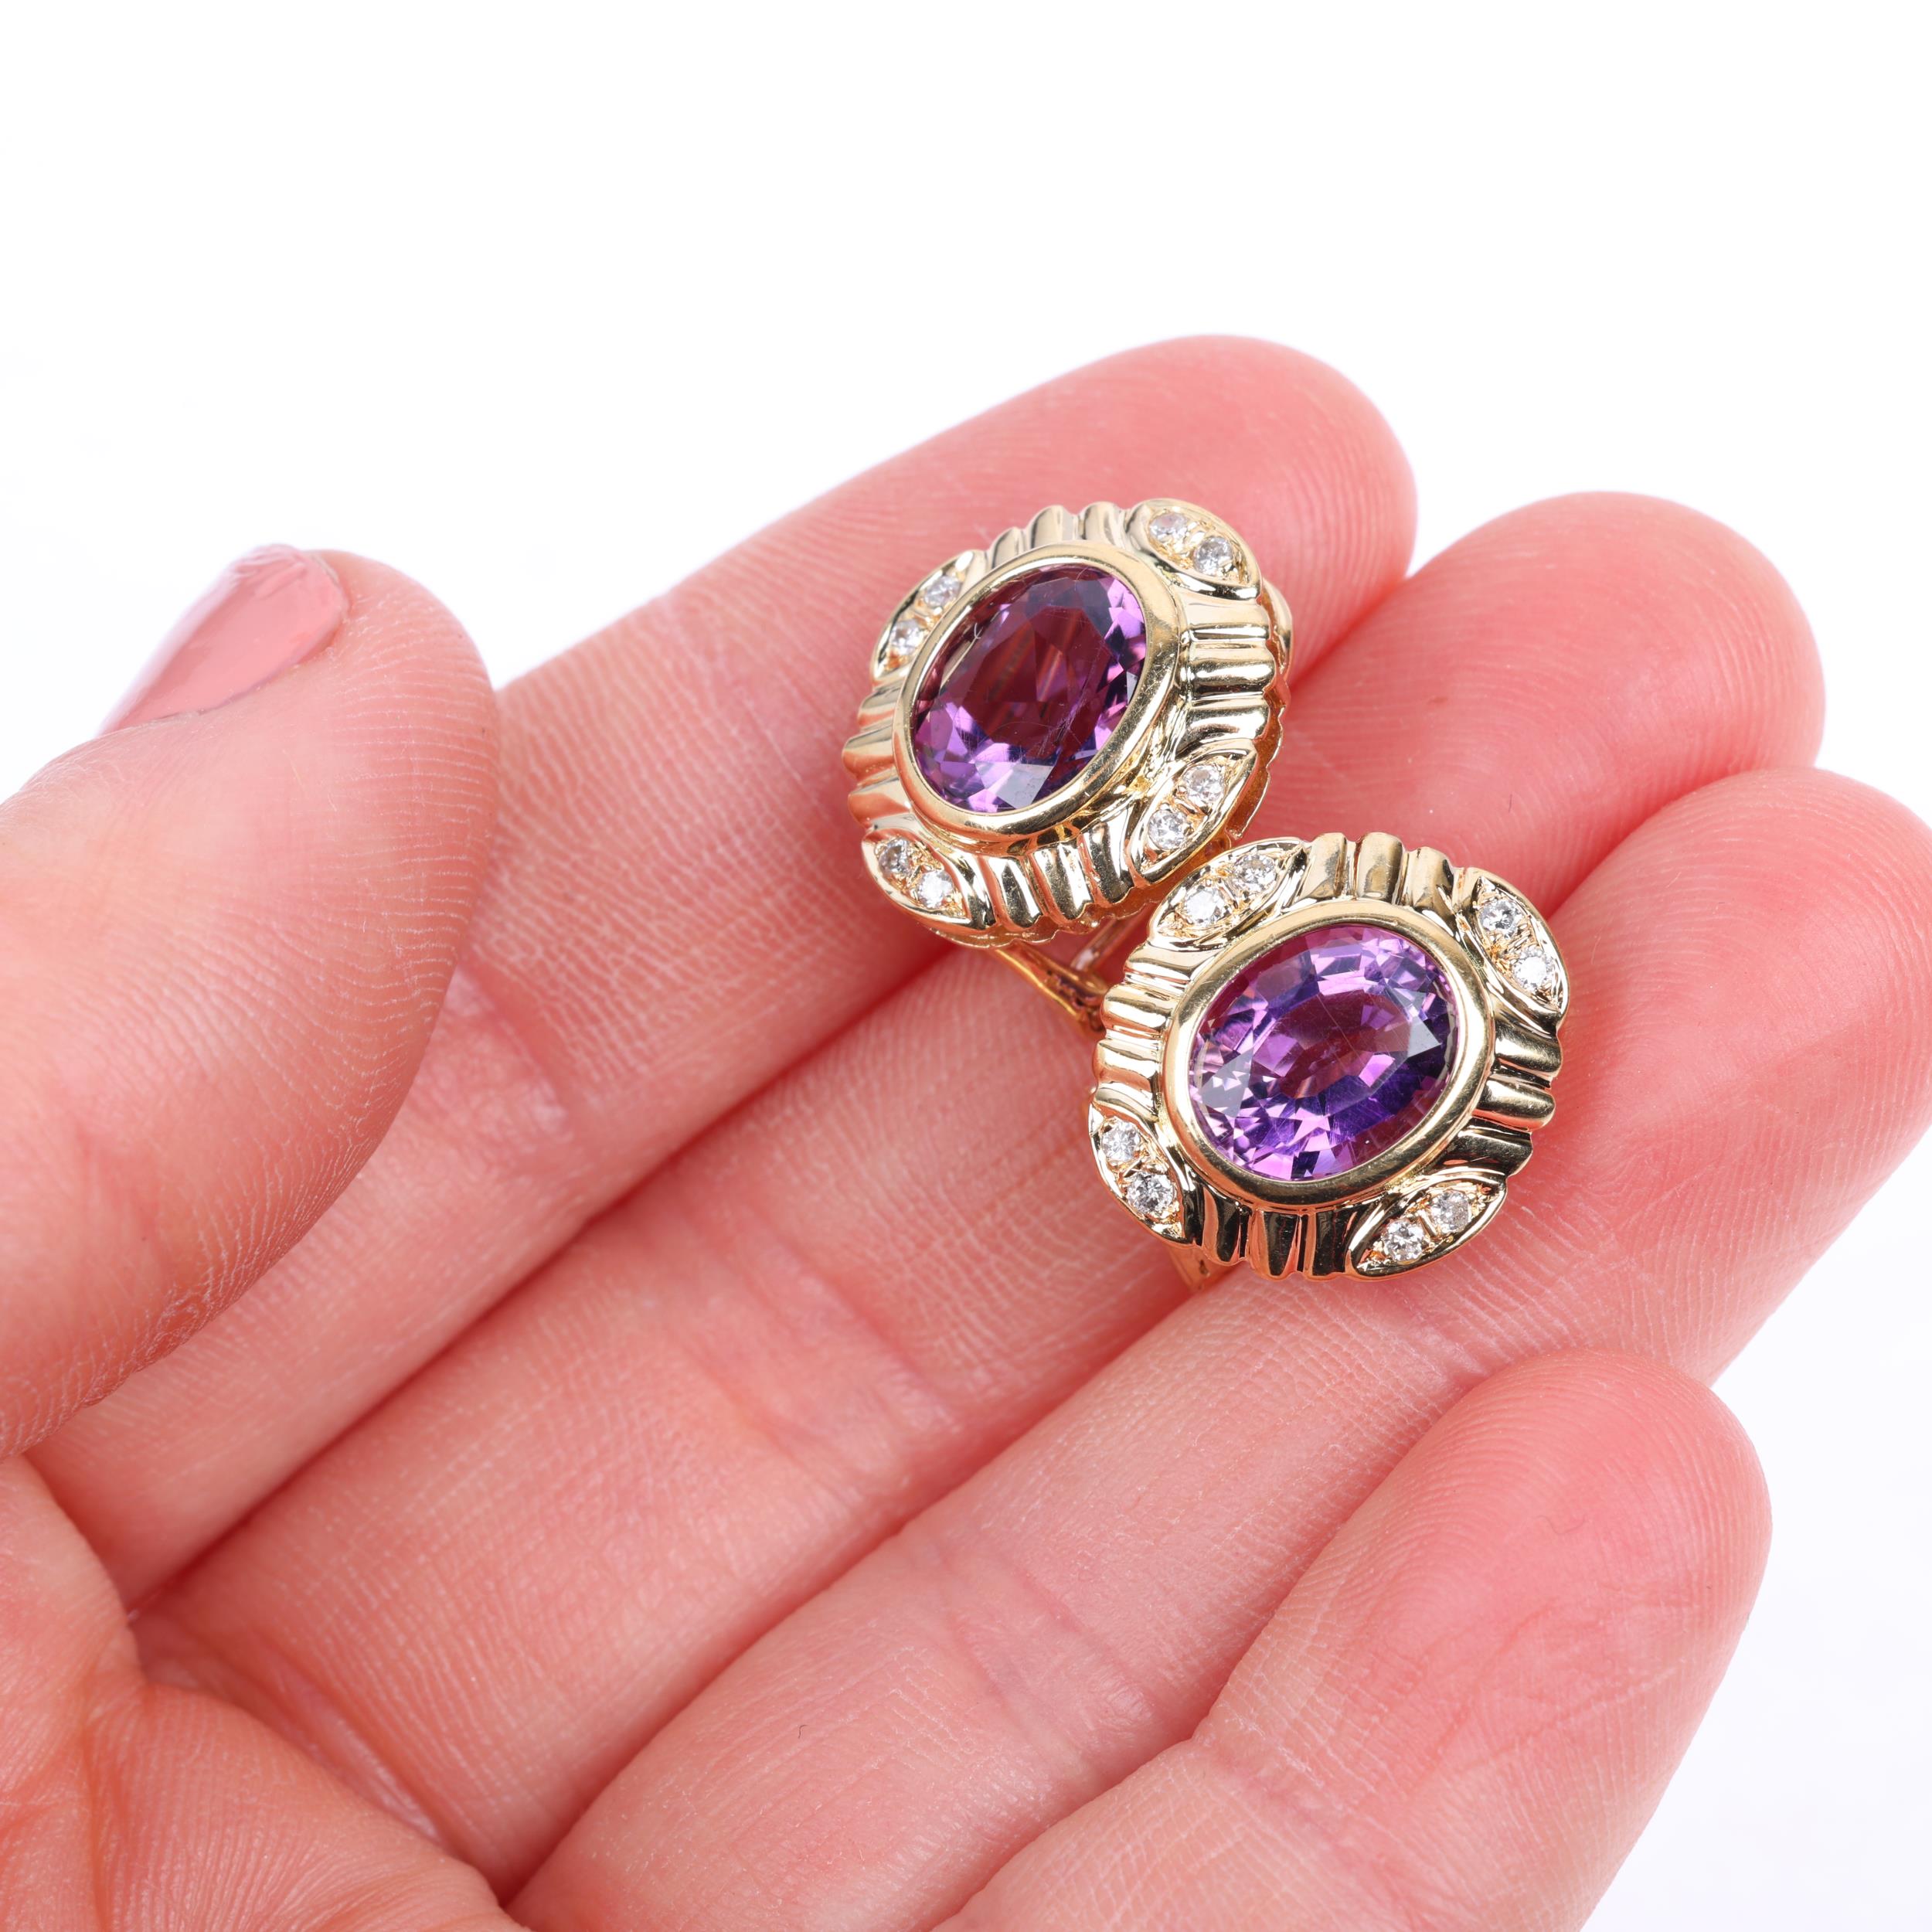 A pair of Italian 18ct gold amethyst and diamond earrings, rub-over set with oval mixed-cut - Image 4 of 4